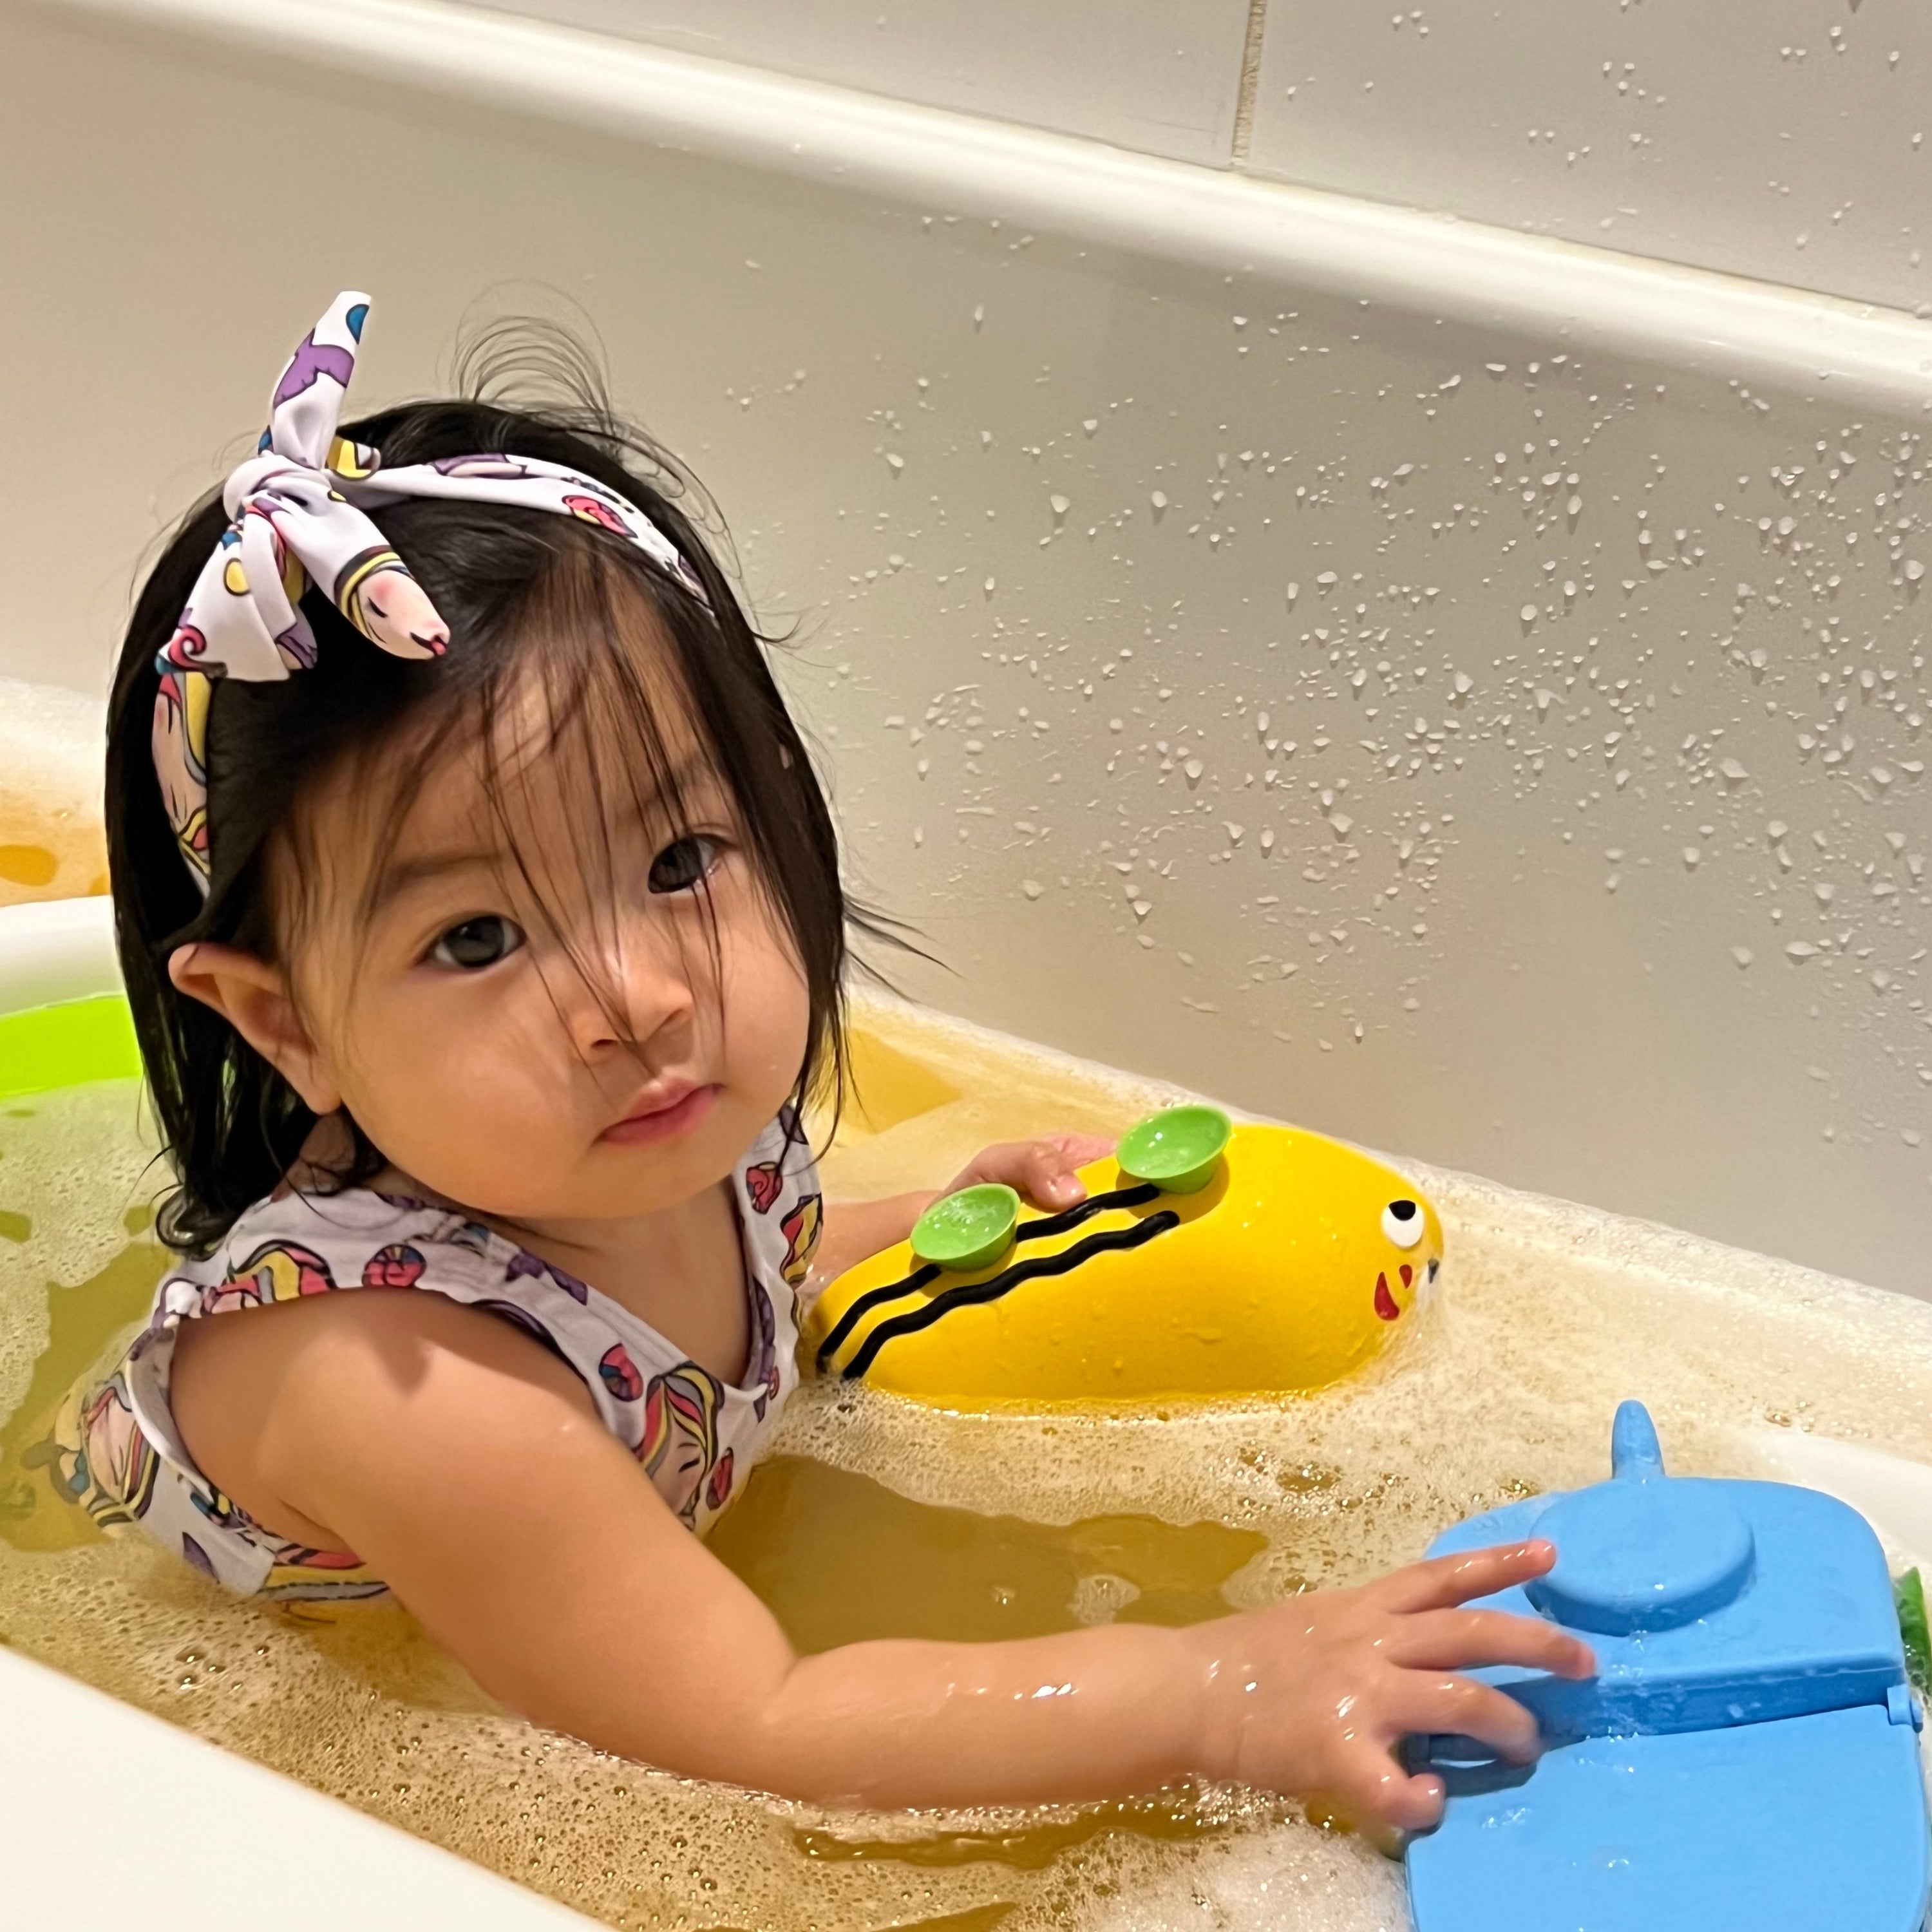 BobBee: The Ultimate Water Toy